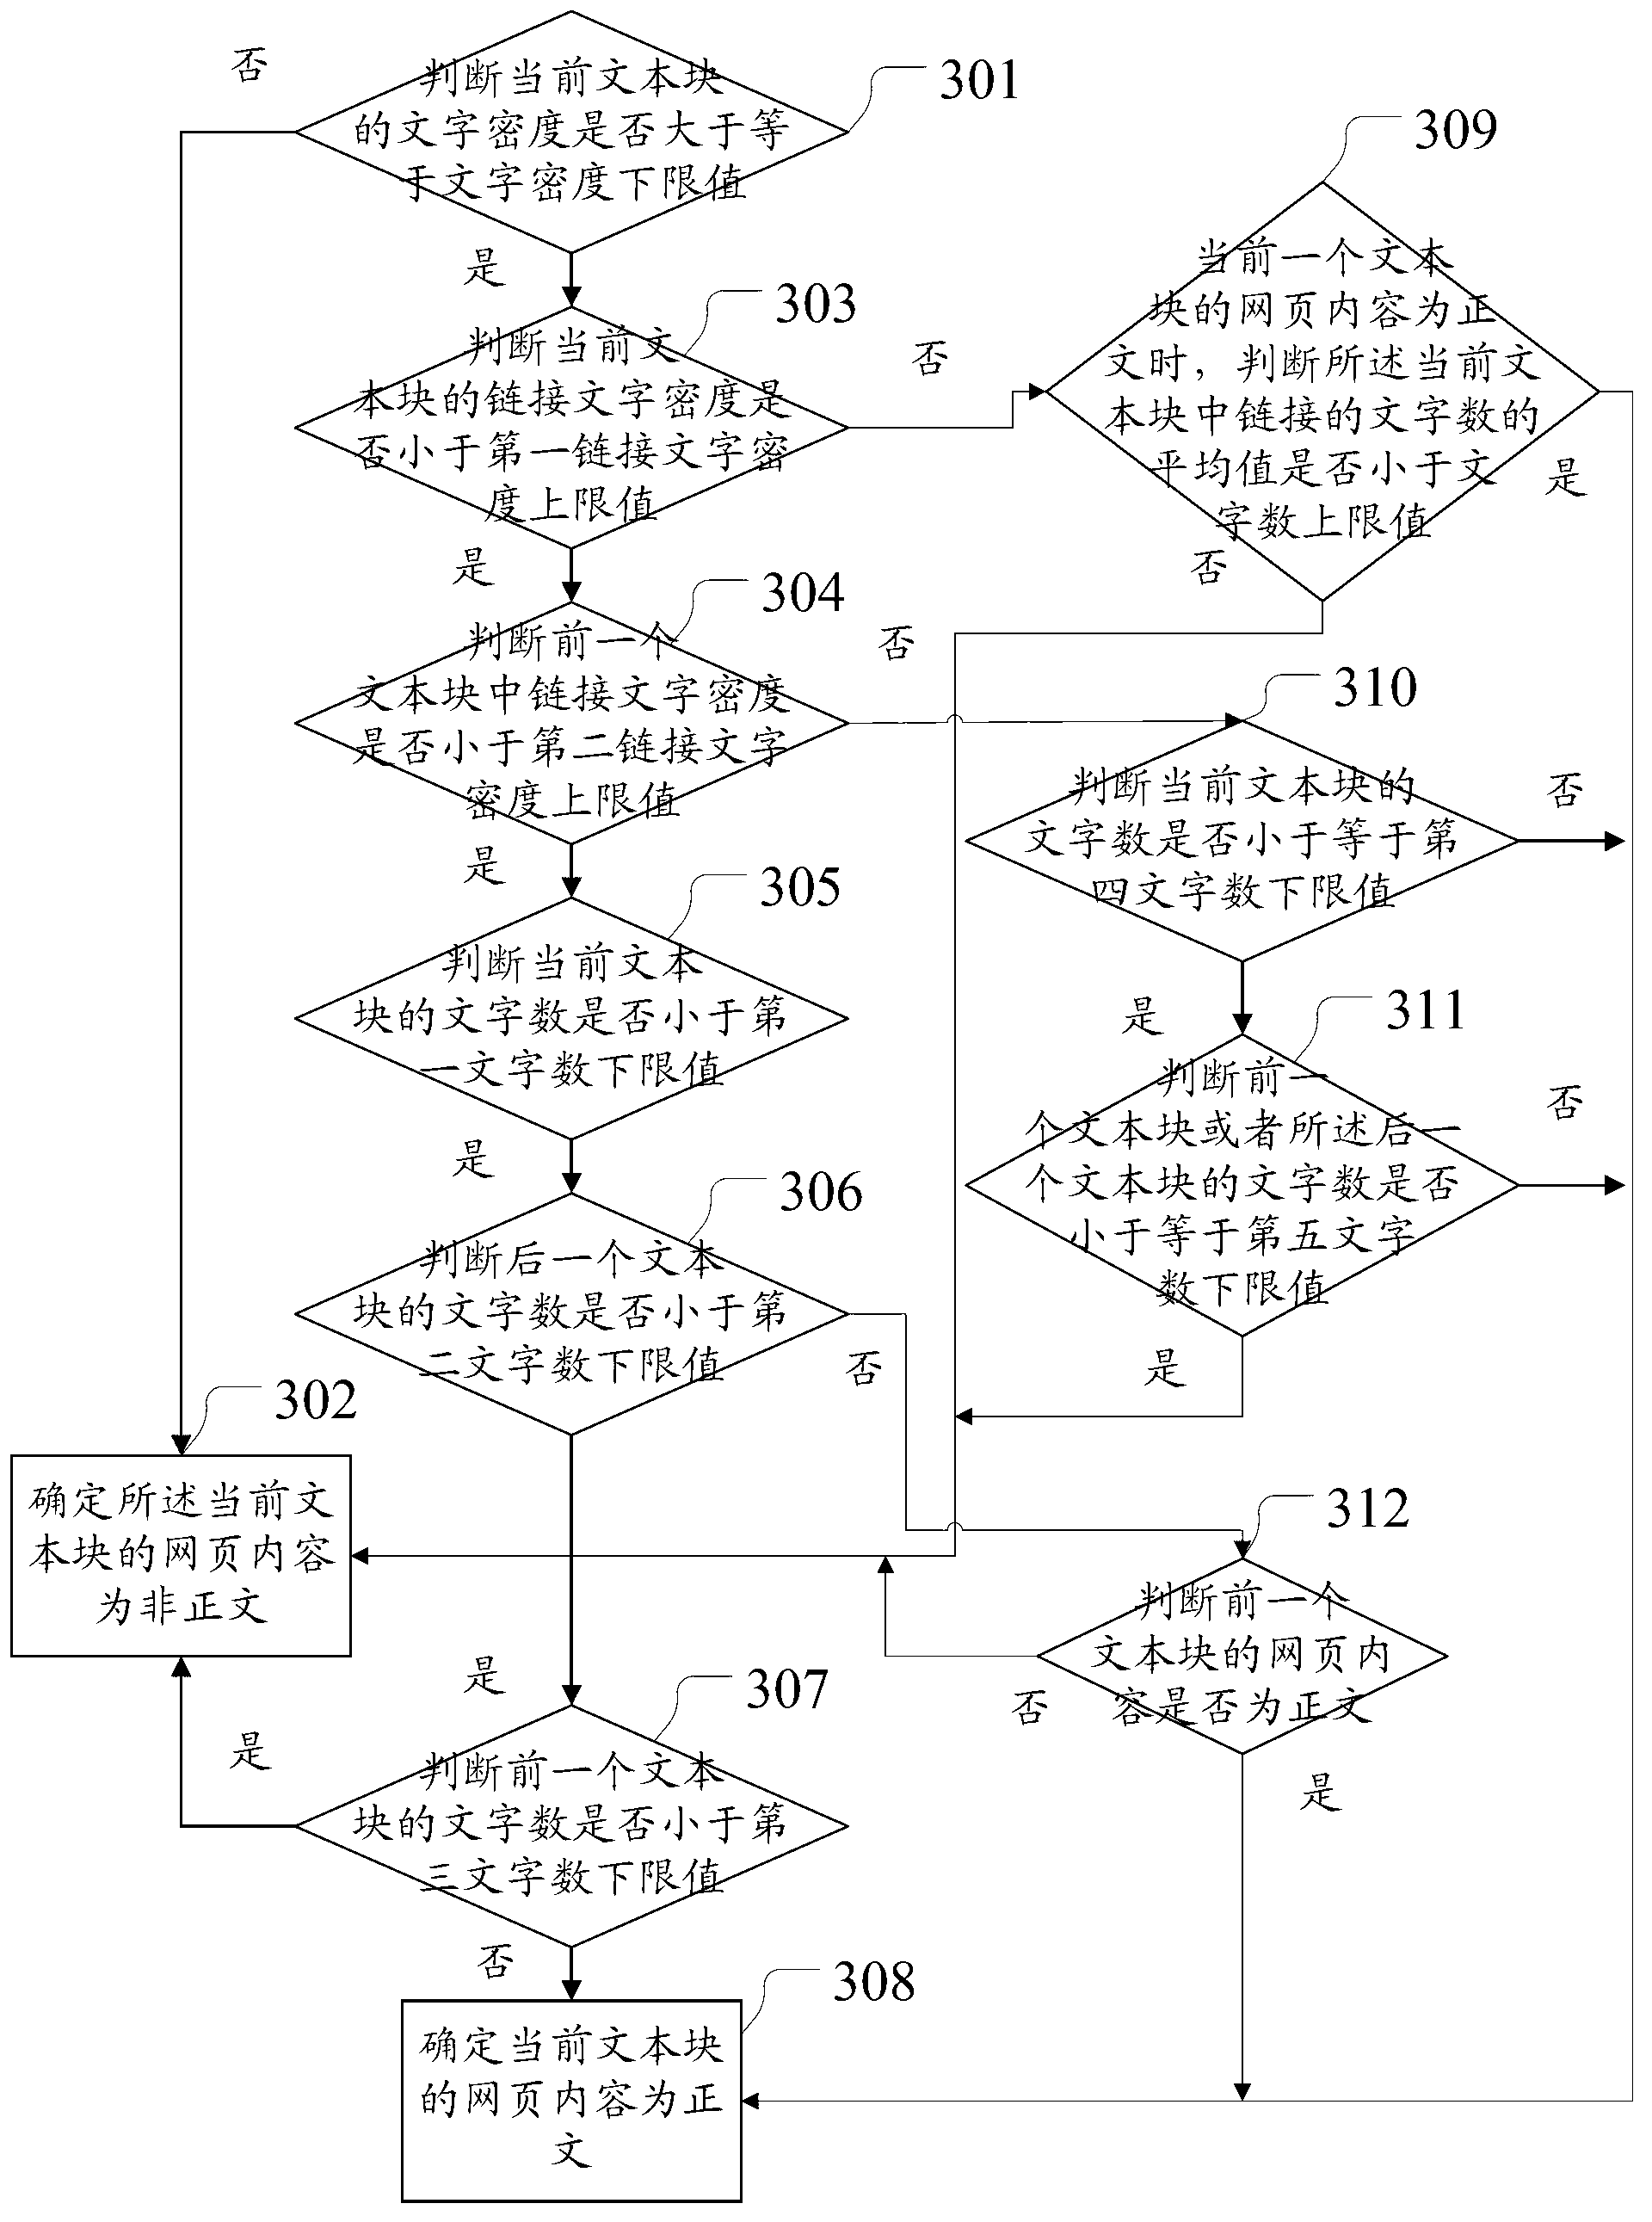 Method and device for extracting webpage content